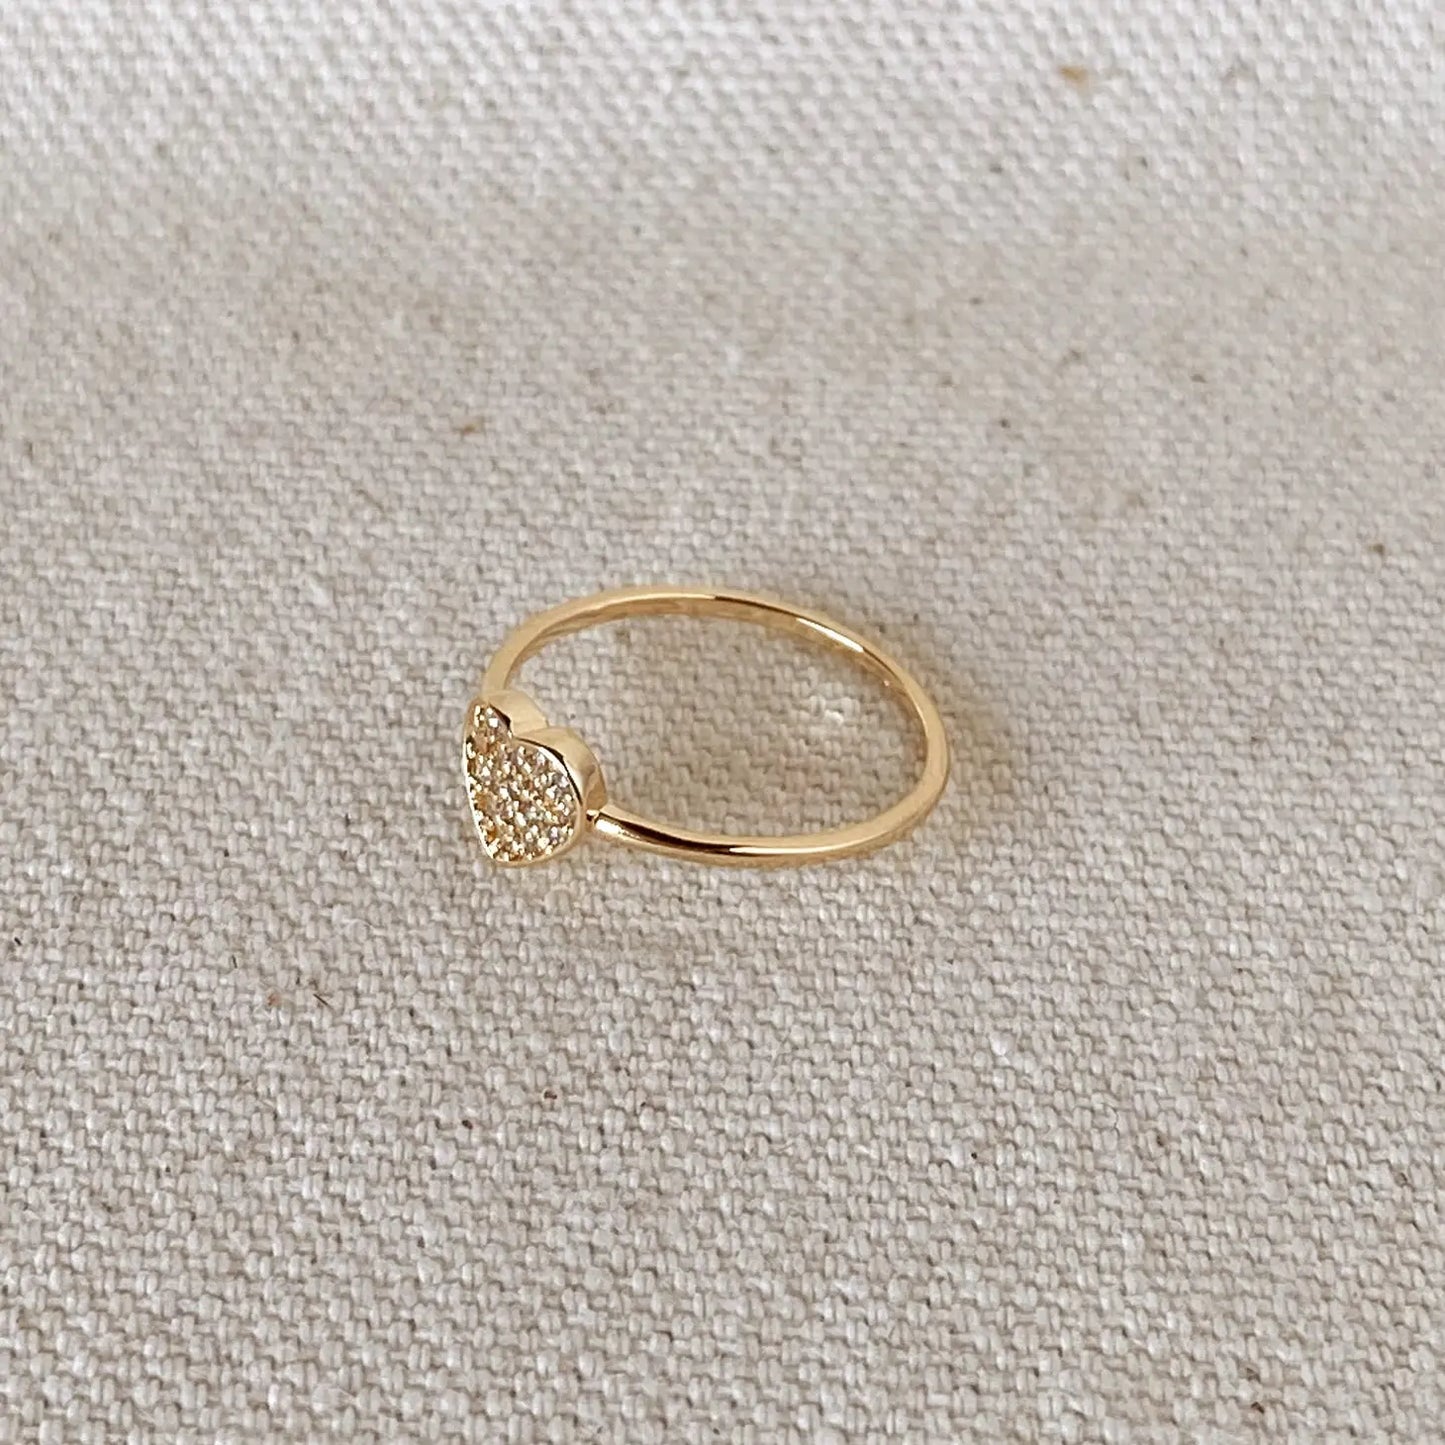 18k GOLD FILLED DAINTY CUBIC ZIRCONIA HEART RING